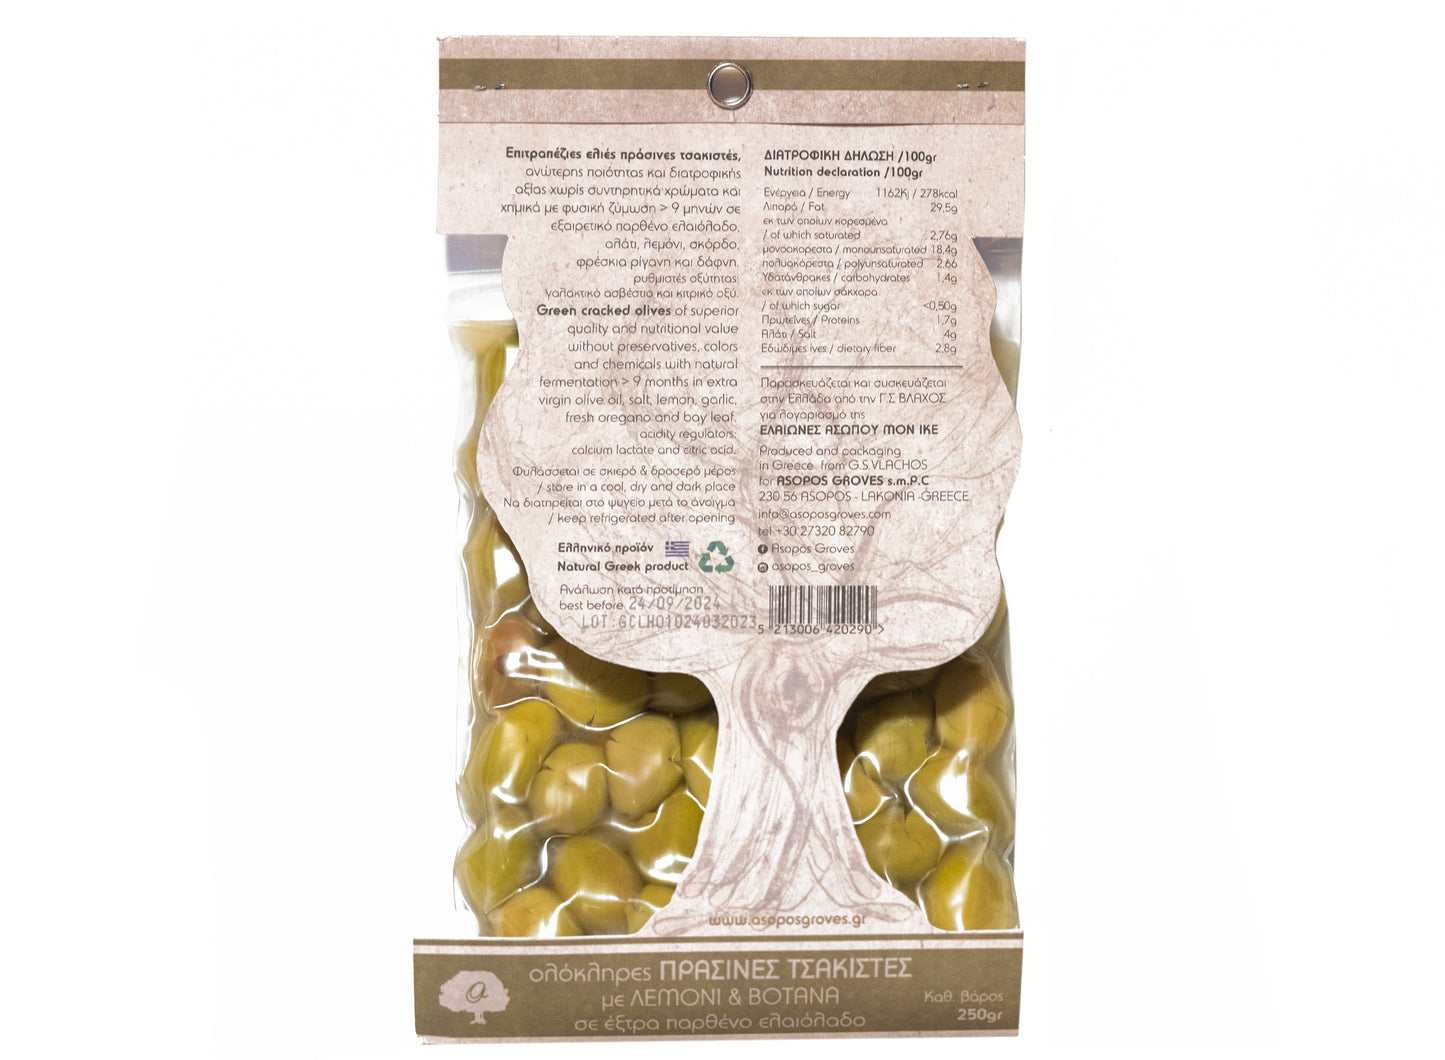 Asopos Groves Green Cracked  Olives with Lemon and Herb Marinated 250gr